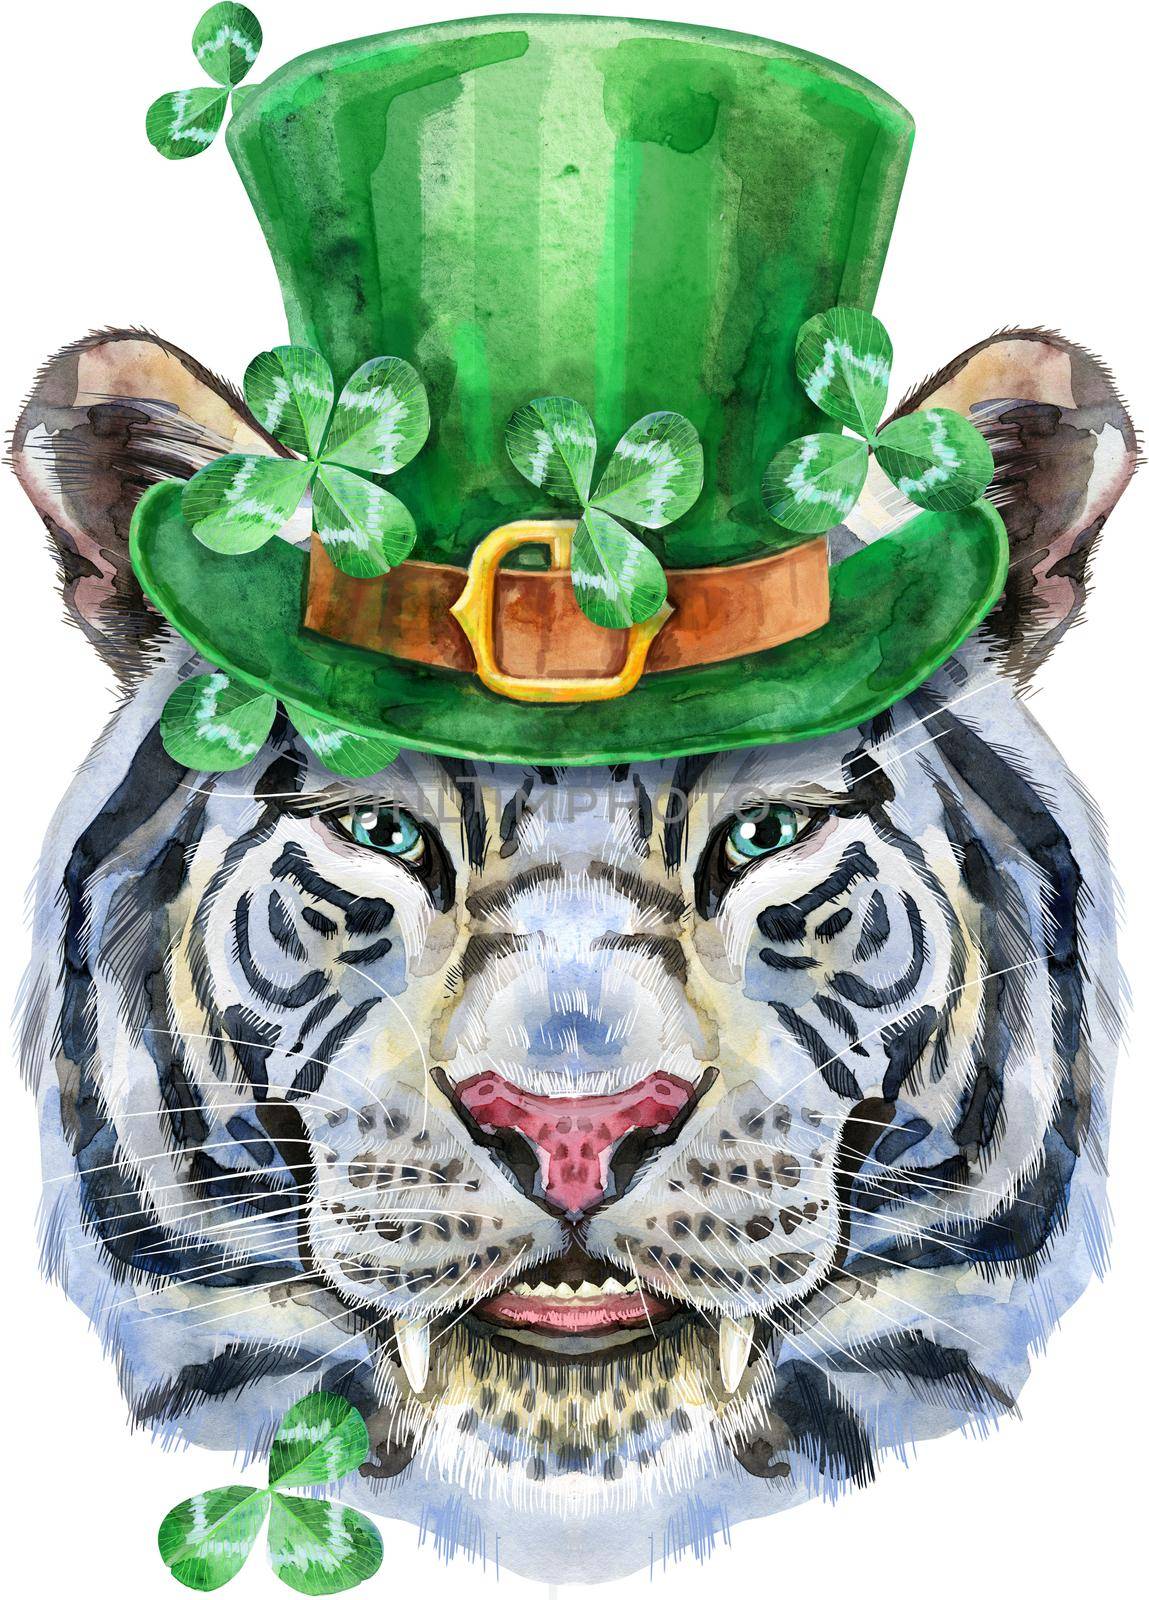 Colorful white smiling tiger wearing a green leprechaun hat. Wild animal watercolor illustration on white background by NataOmsk